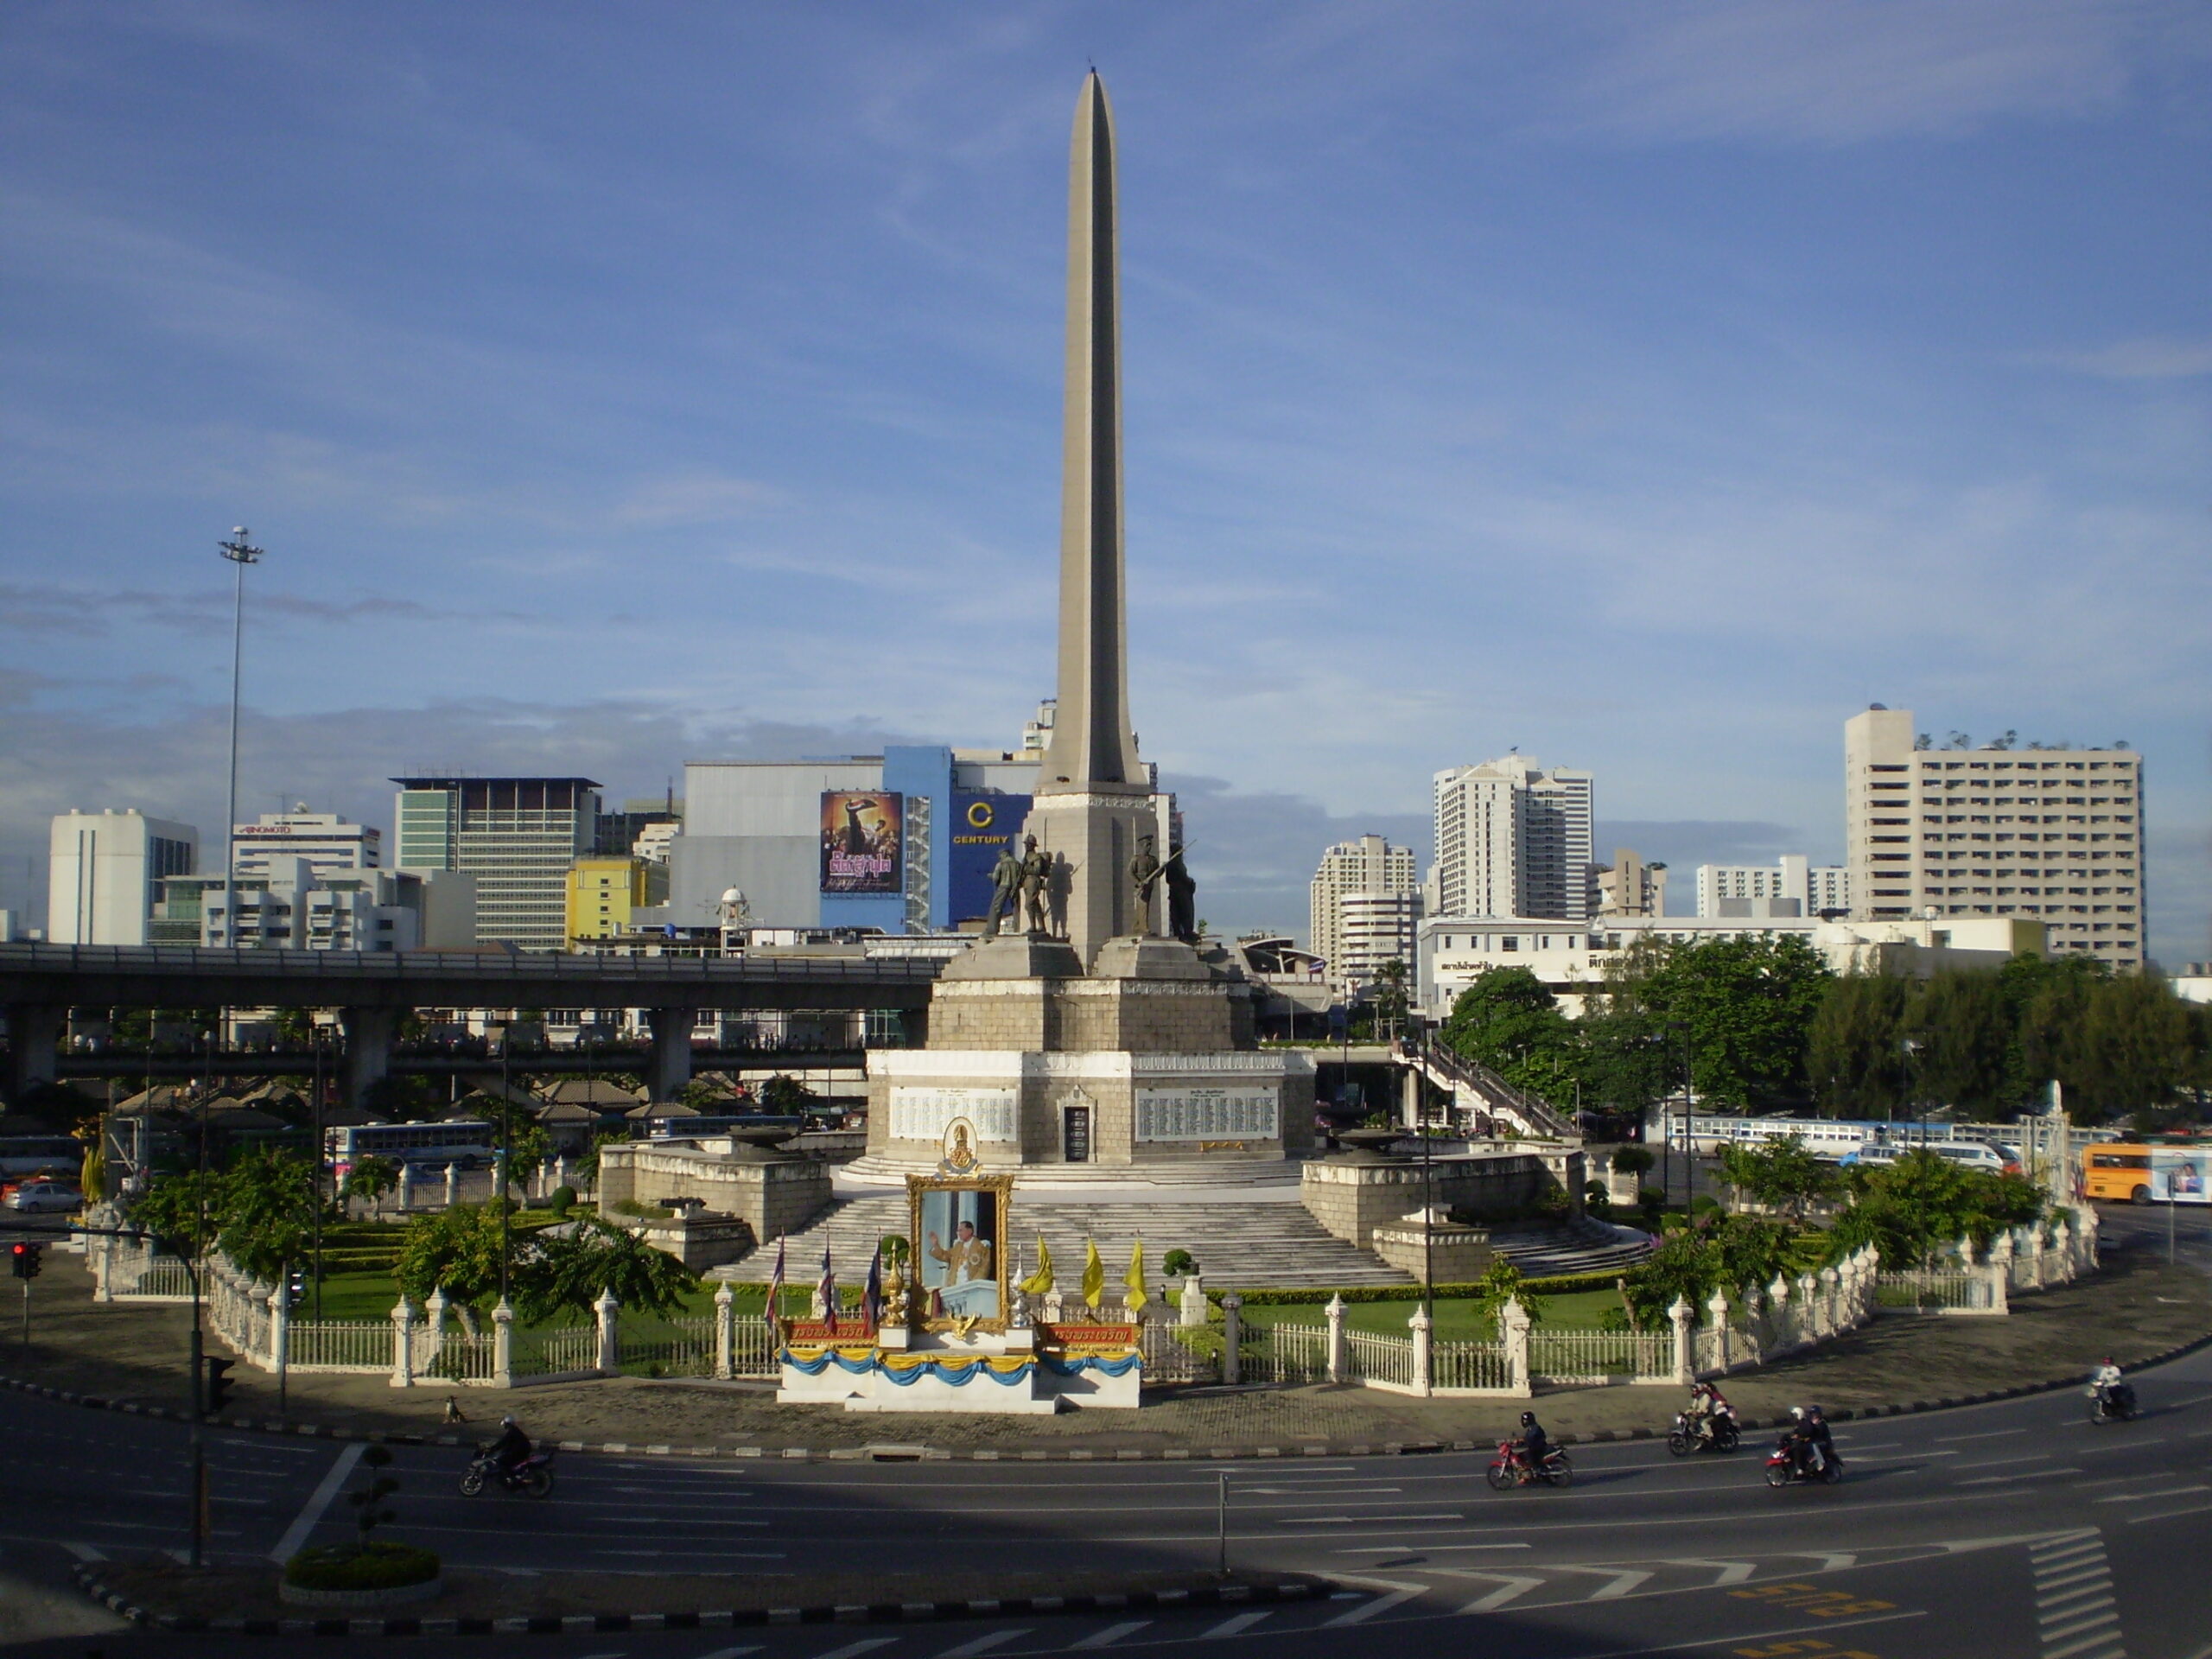 National monument of Maldives - Victory Monument